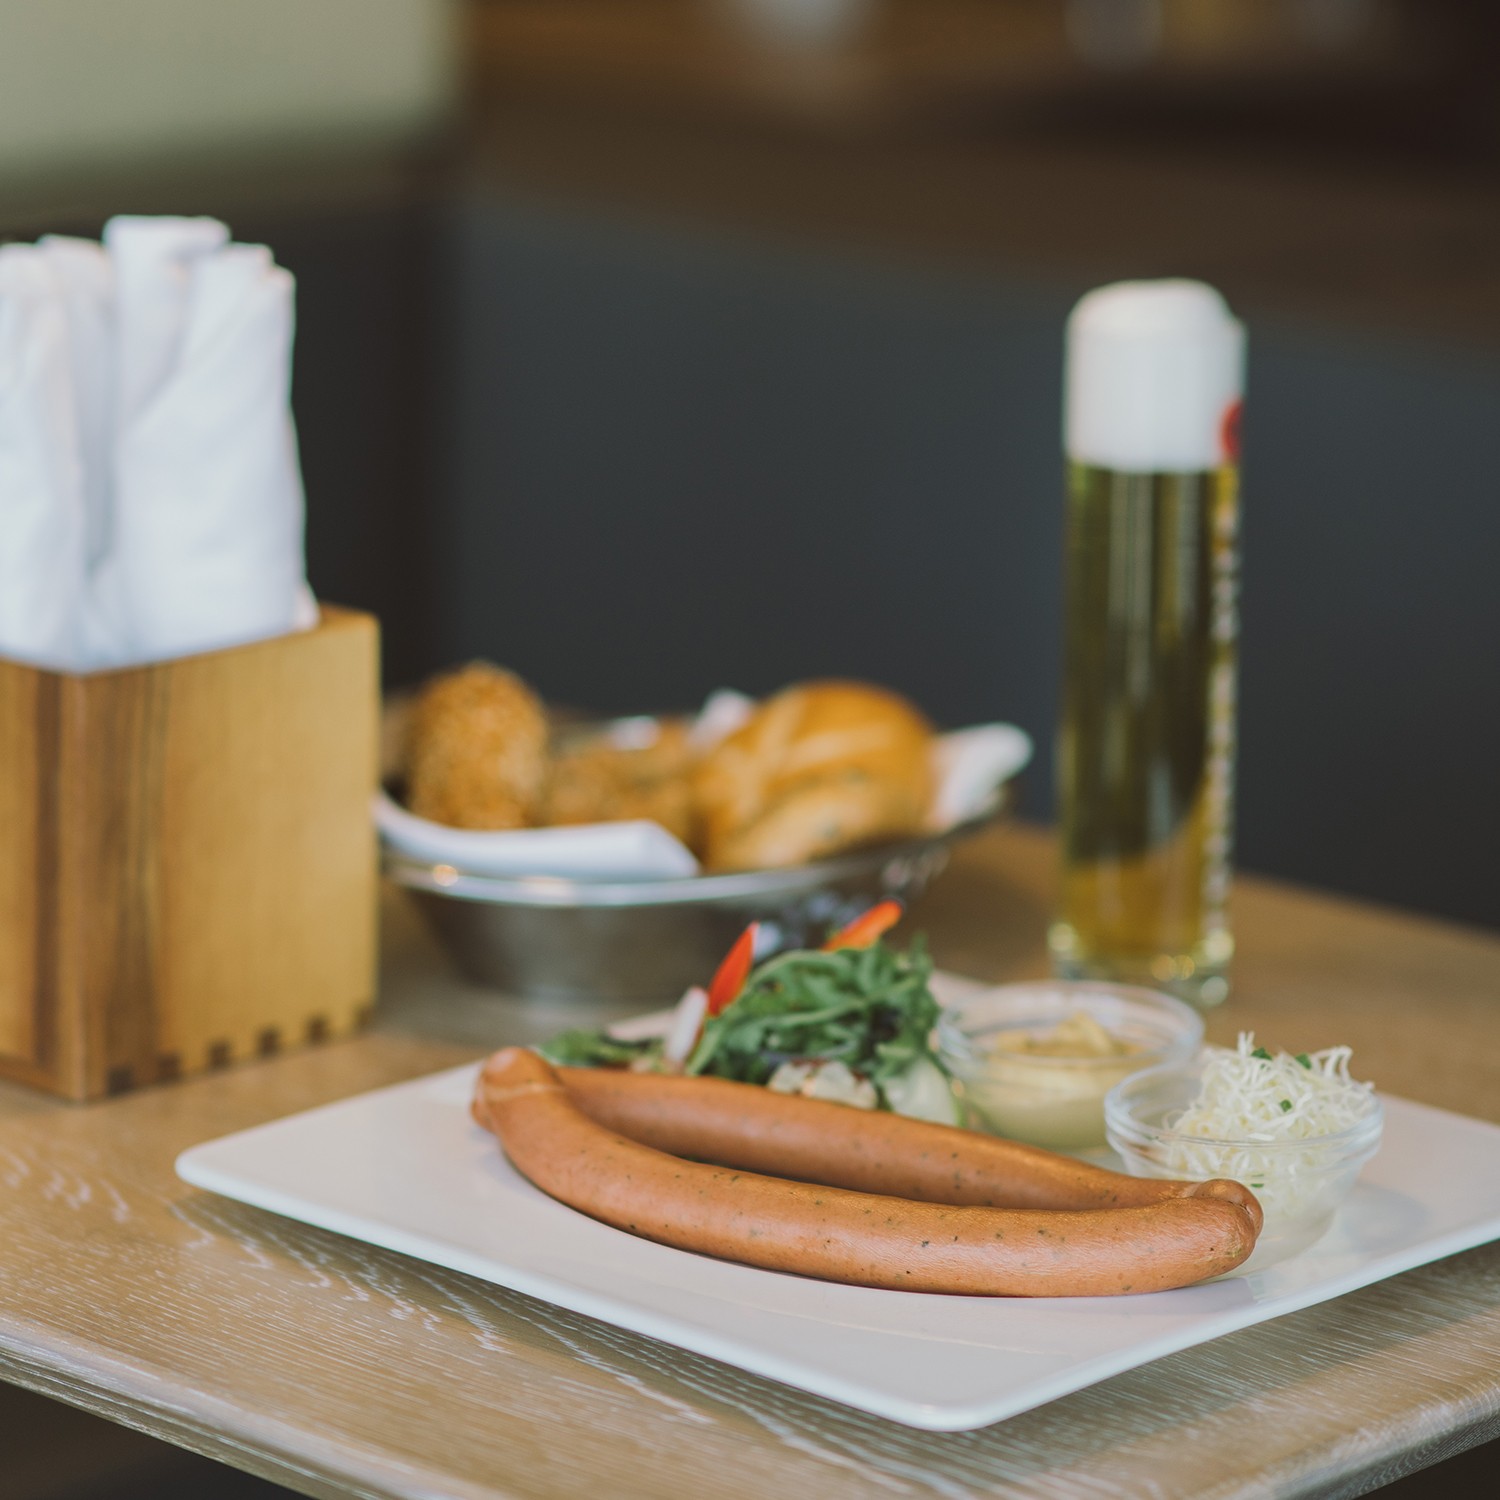 Hotel Reiters Supreme - Sausages with pastries and a glass of beer